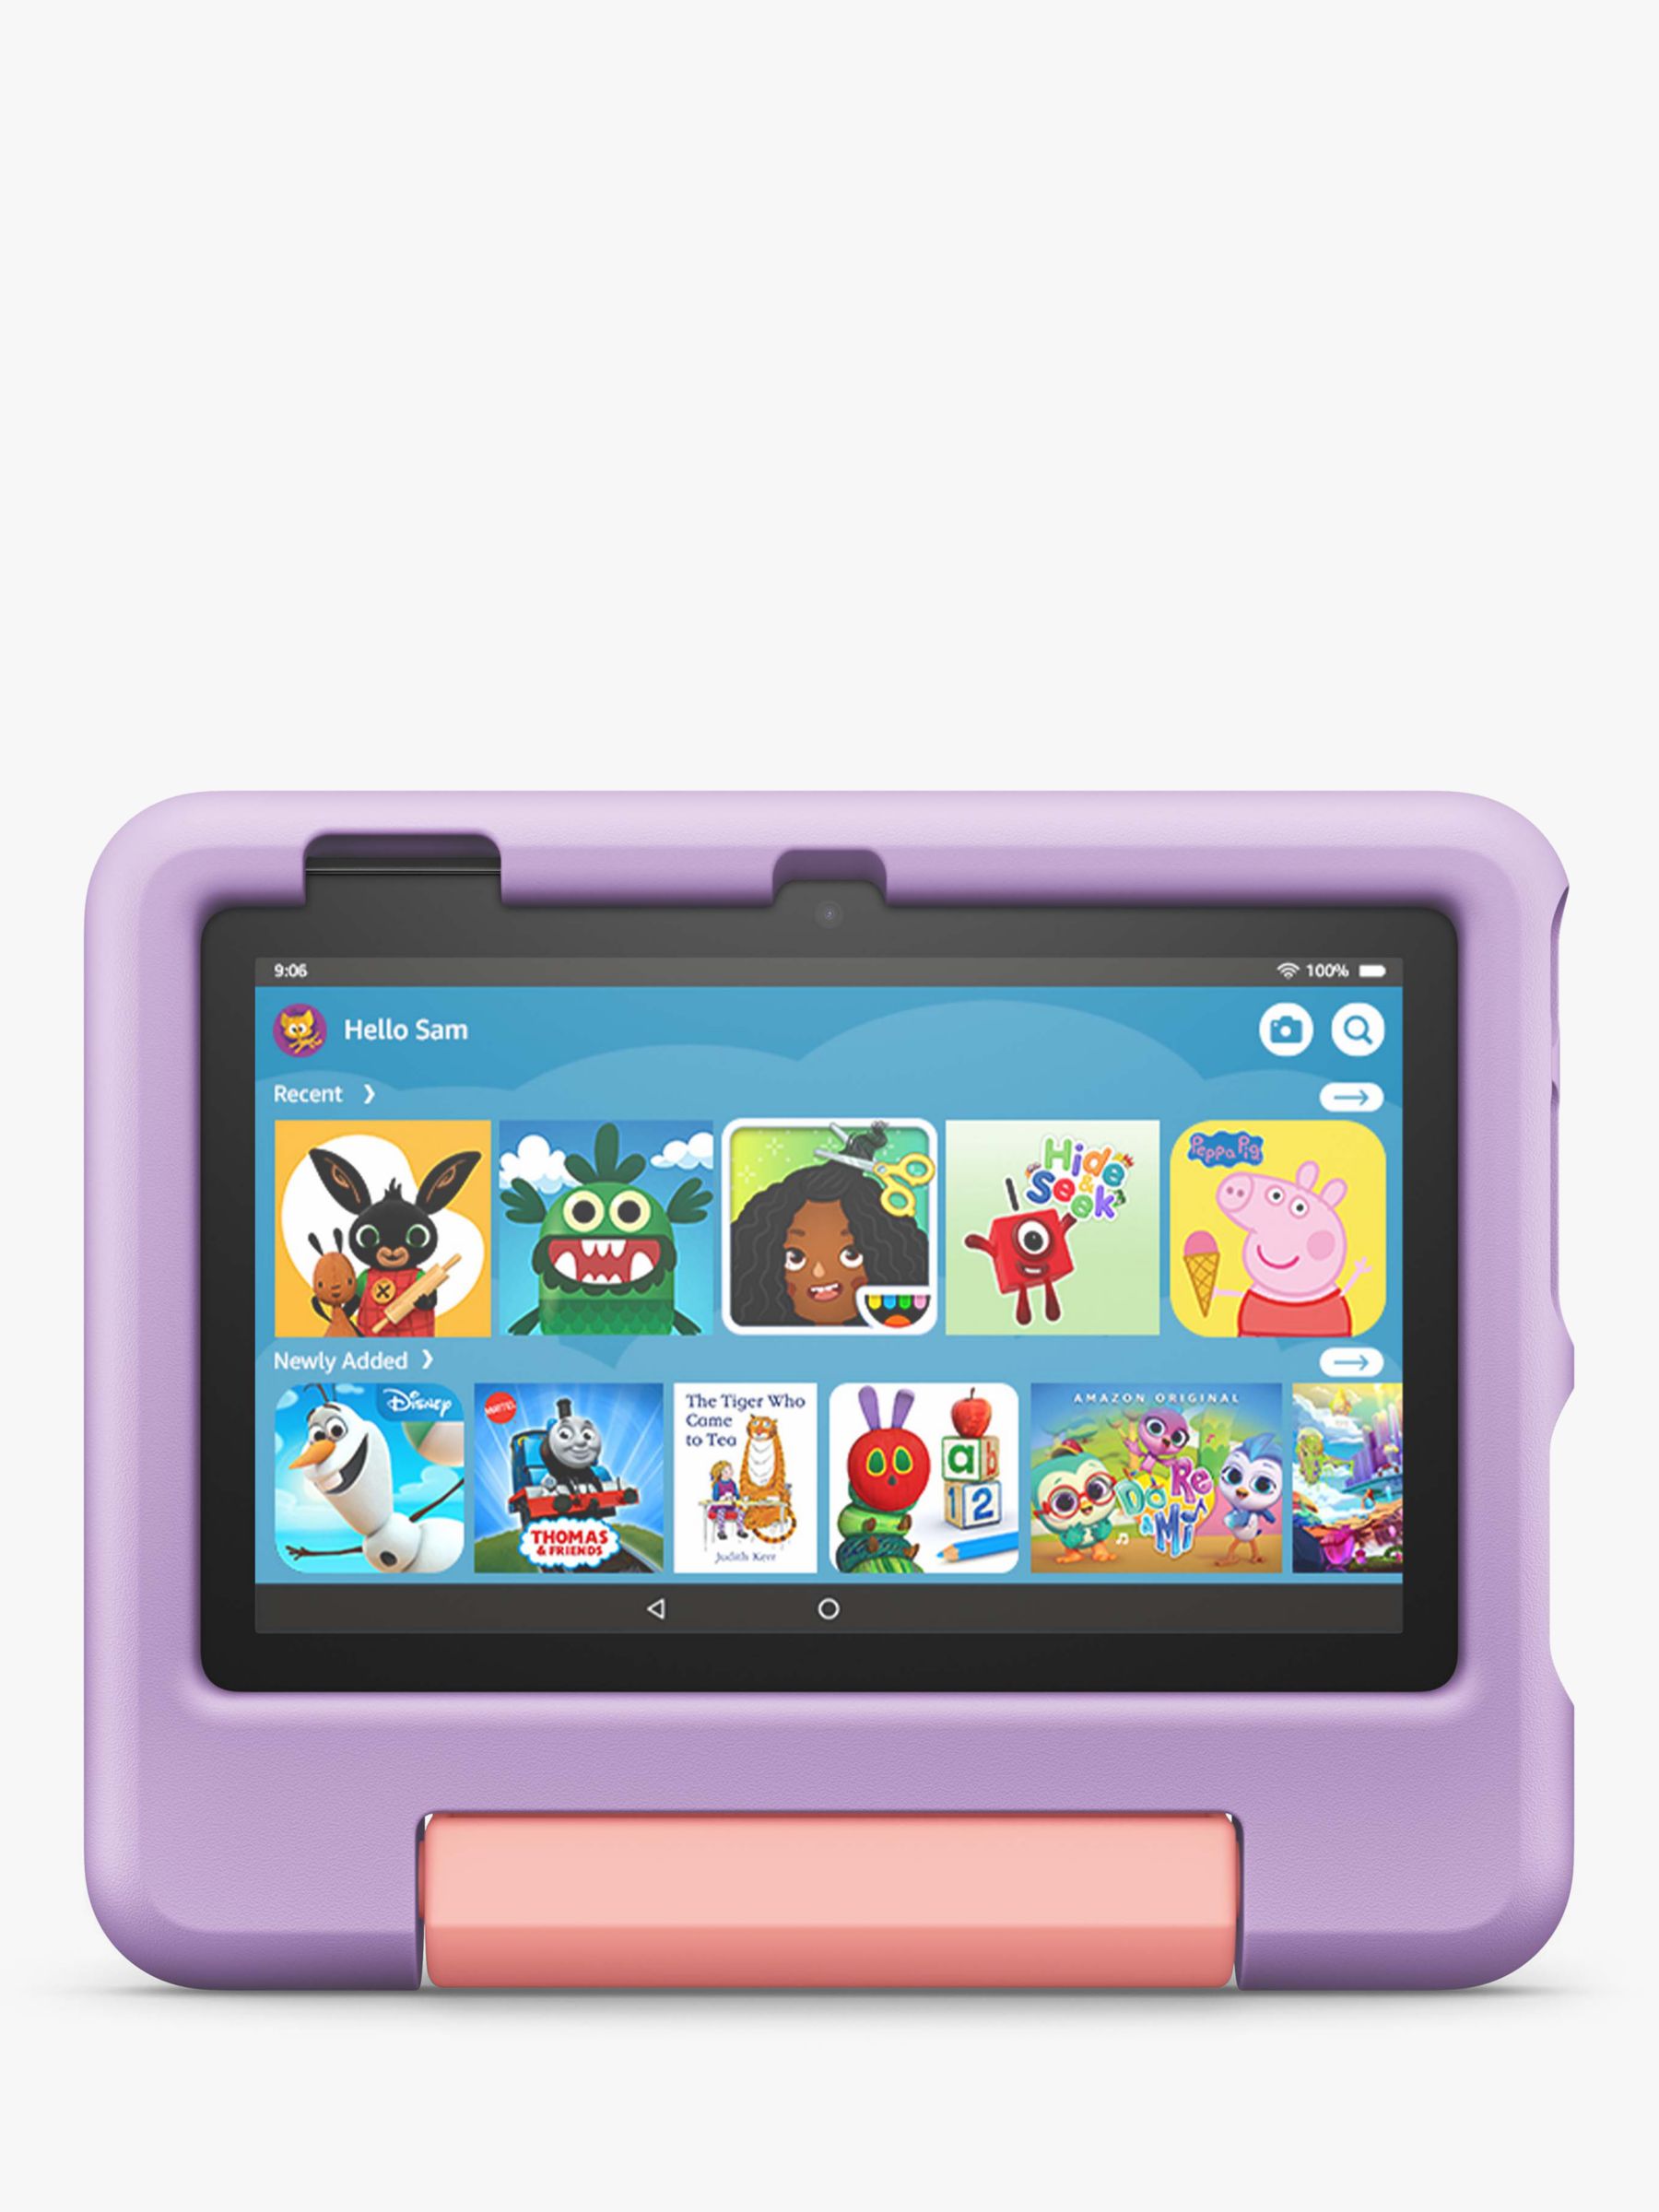 Amazon Fire 7 Kids Edition Tablet (12th Generation, with Case, Quad-core, Fire Wi-Fi, 16GB, 7", Purple